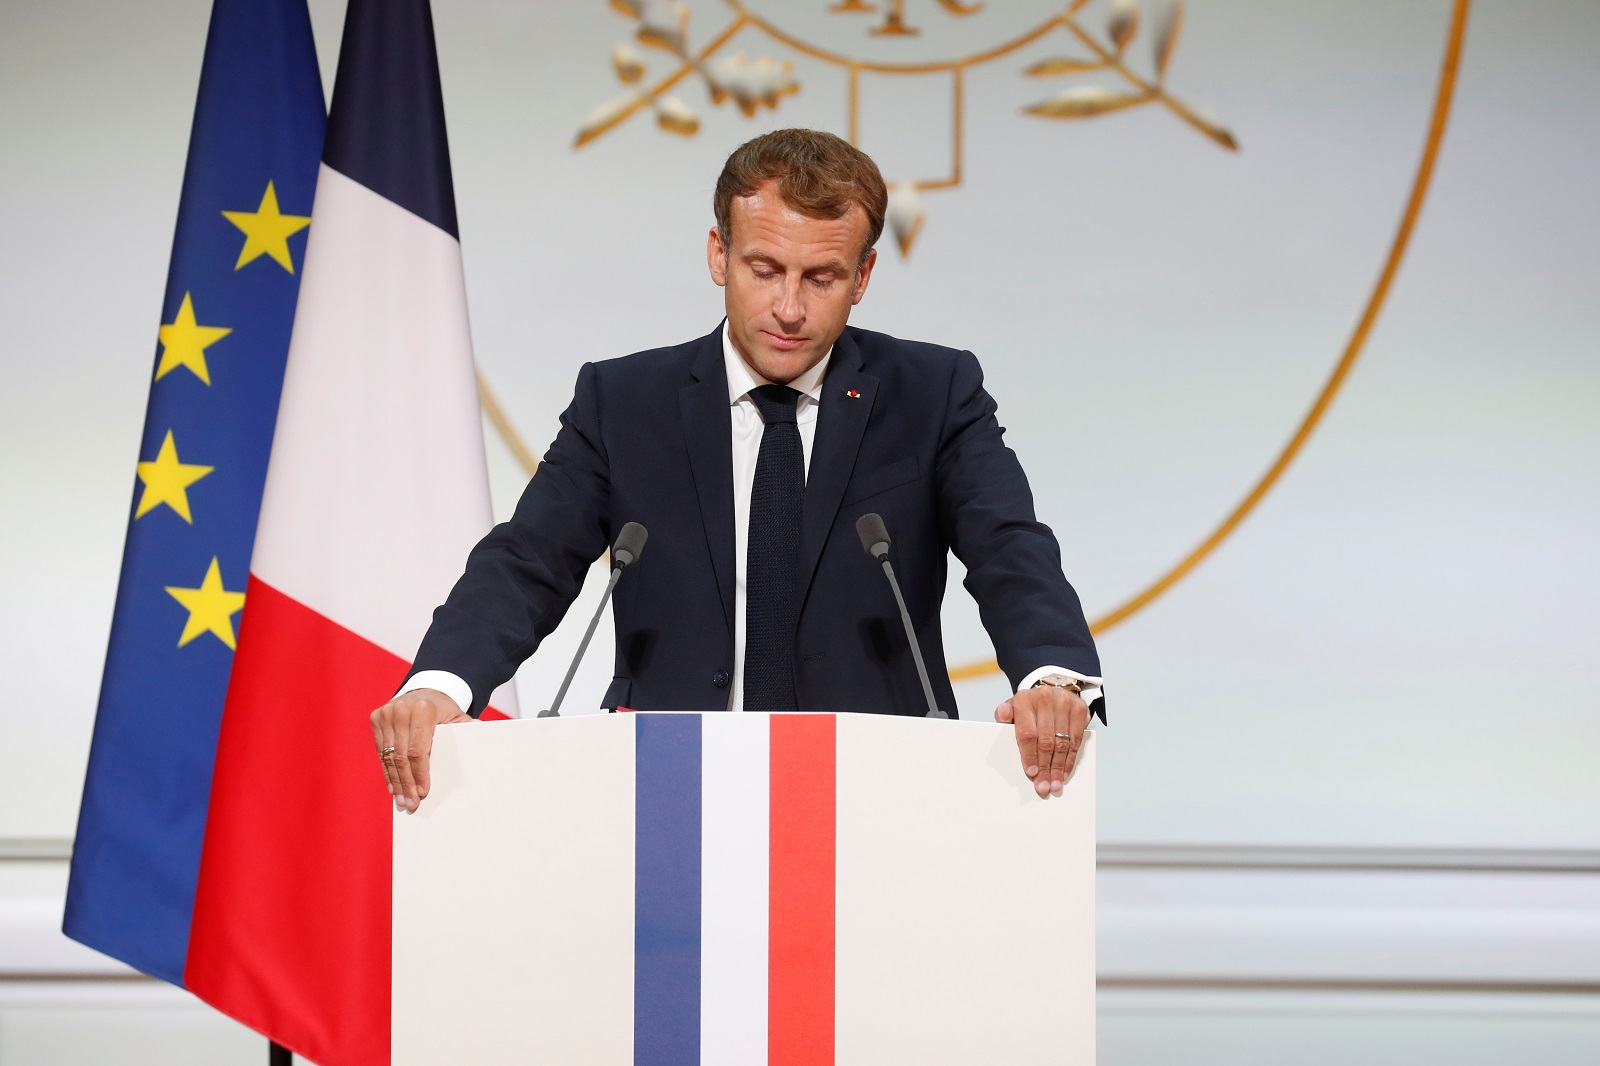 epa09477549 French President Emmanuel Macron delivers a speech during a ceremony in memory of the Harkis, Algerians who helped the French Army in the Algerian War of Independence, at the Elysee Palace in Paris, France, 20 September 2021.  EPA/GONZALO FUENTES / POOL  MAXPPP OUT